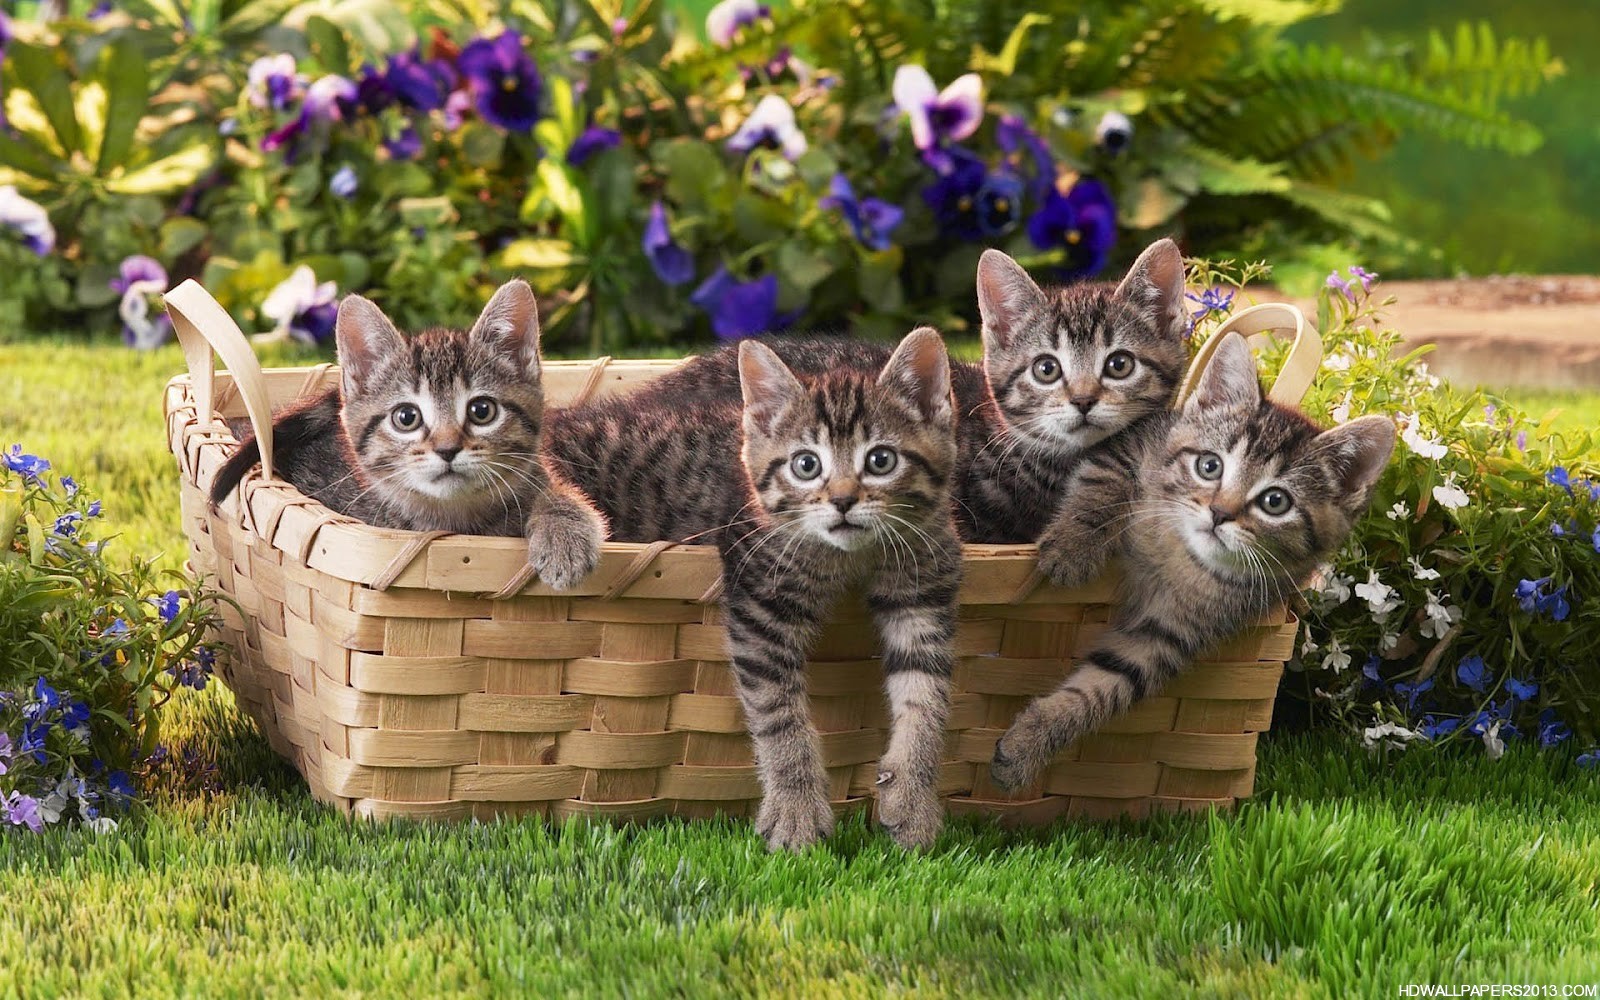 Cats Wallpaper Free Download | High Definition Wallpapers, High